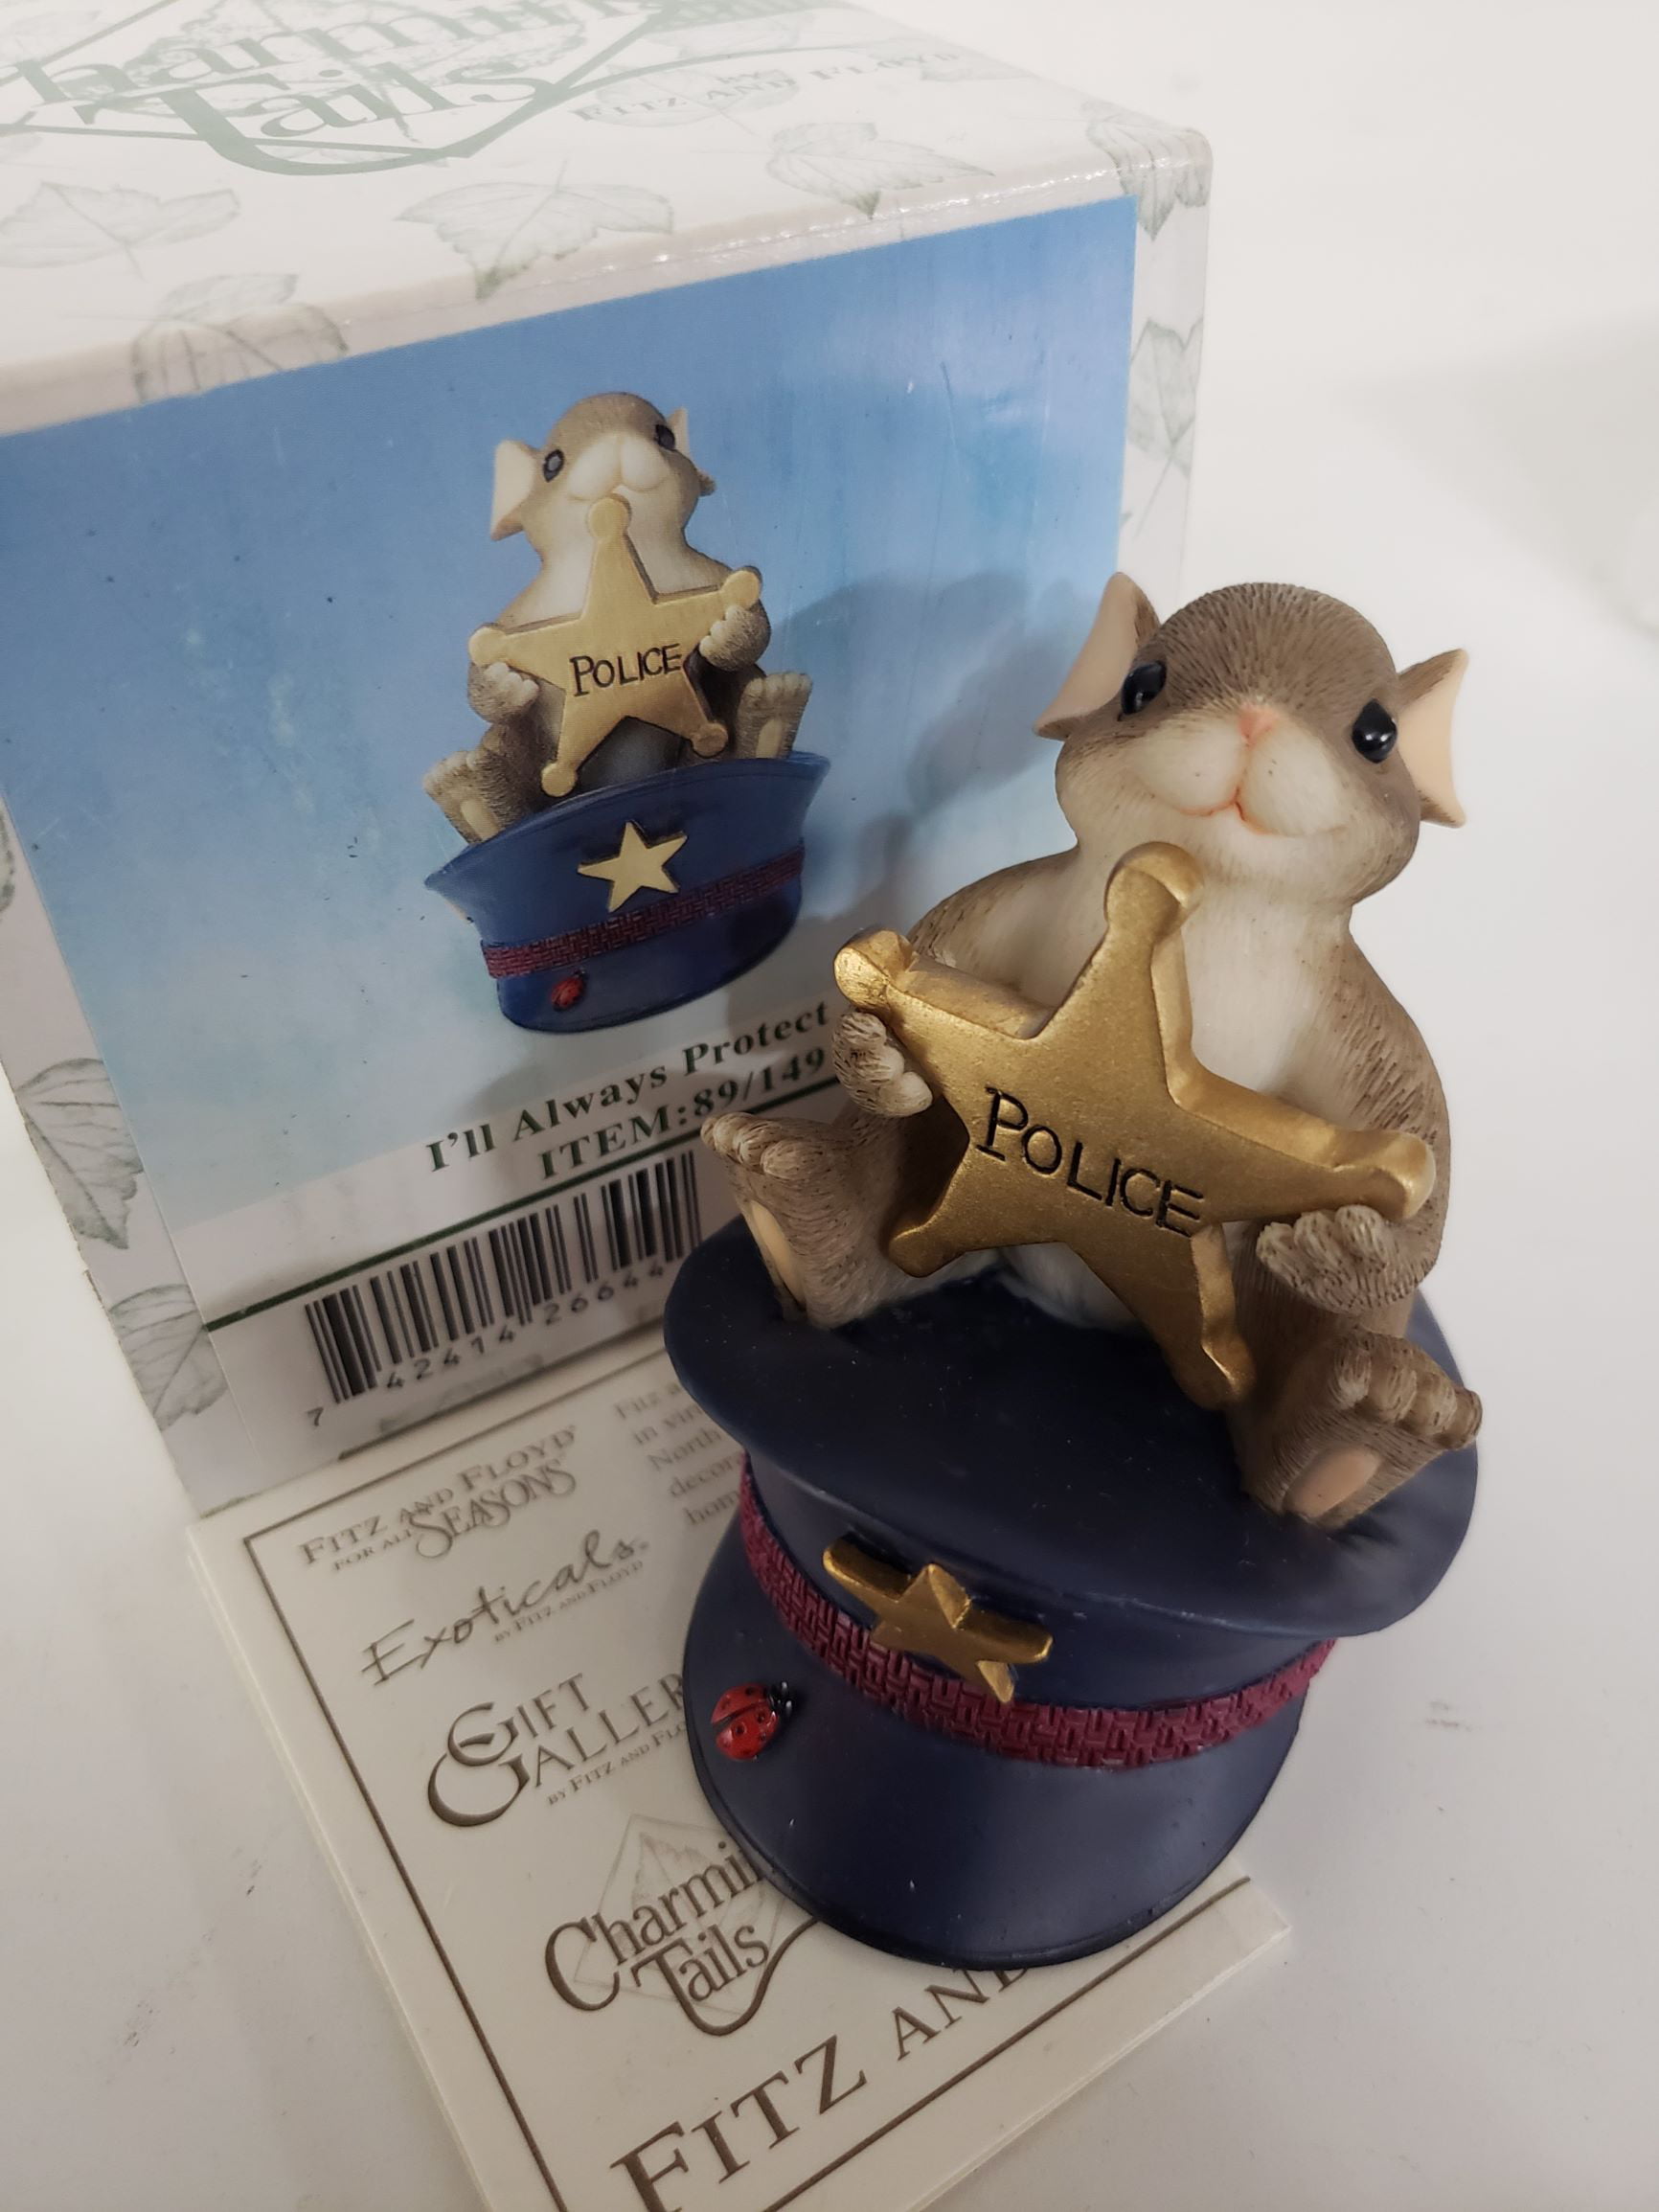 YOUR CHOICE! The World of Charming Tails Fitz & Floyd Mouse Figurine With Box